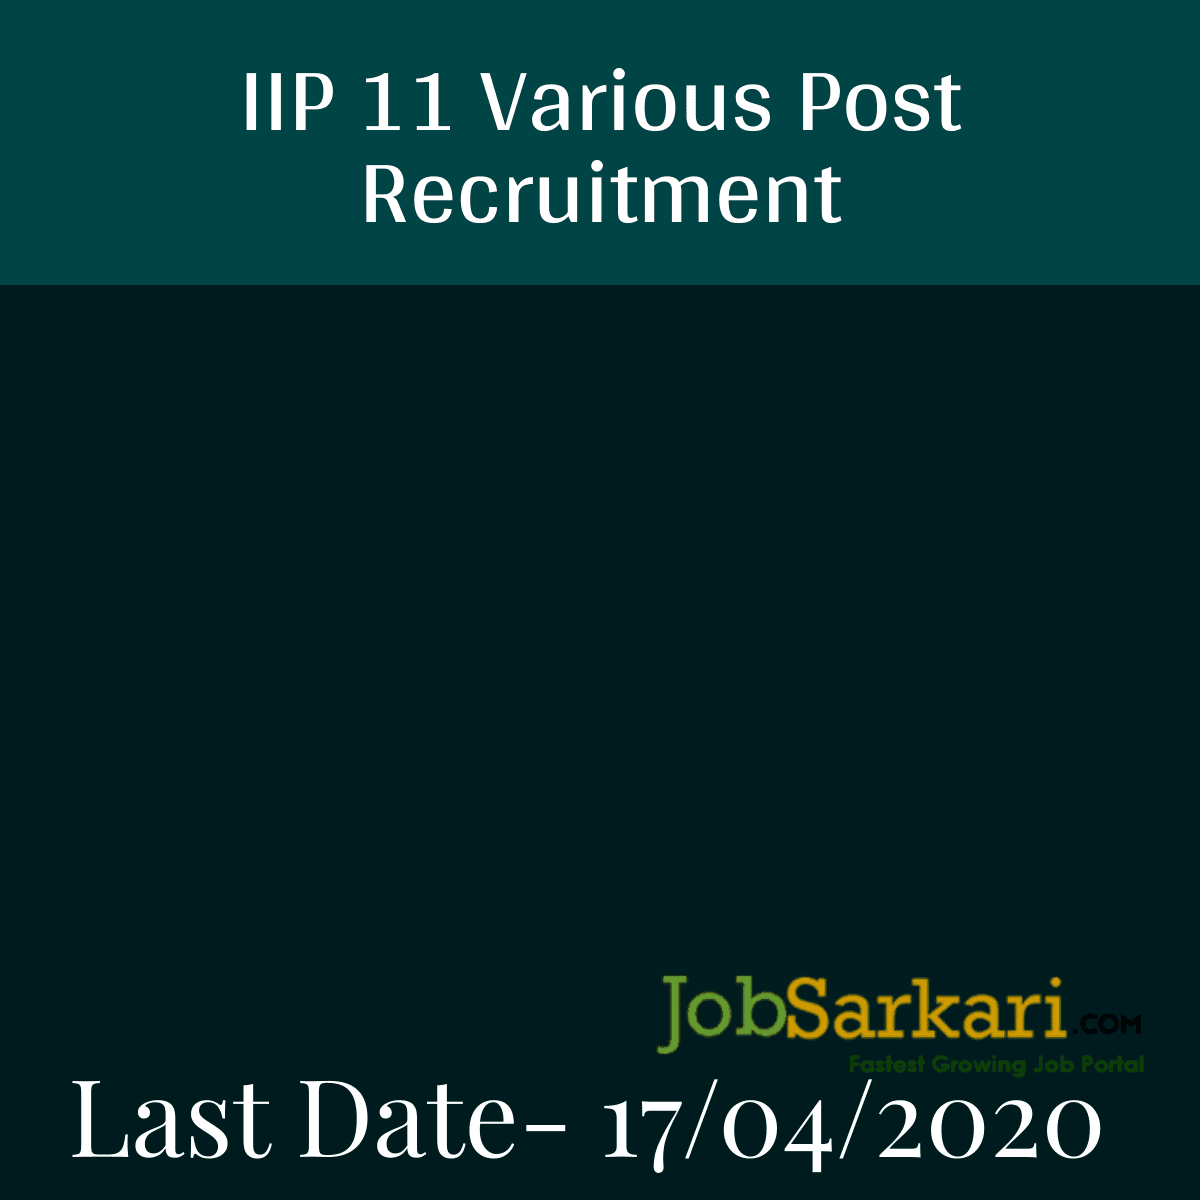 IIP Recruitment 2020 For Various Pos